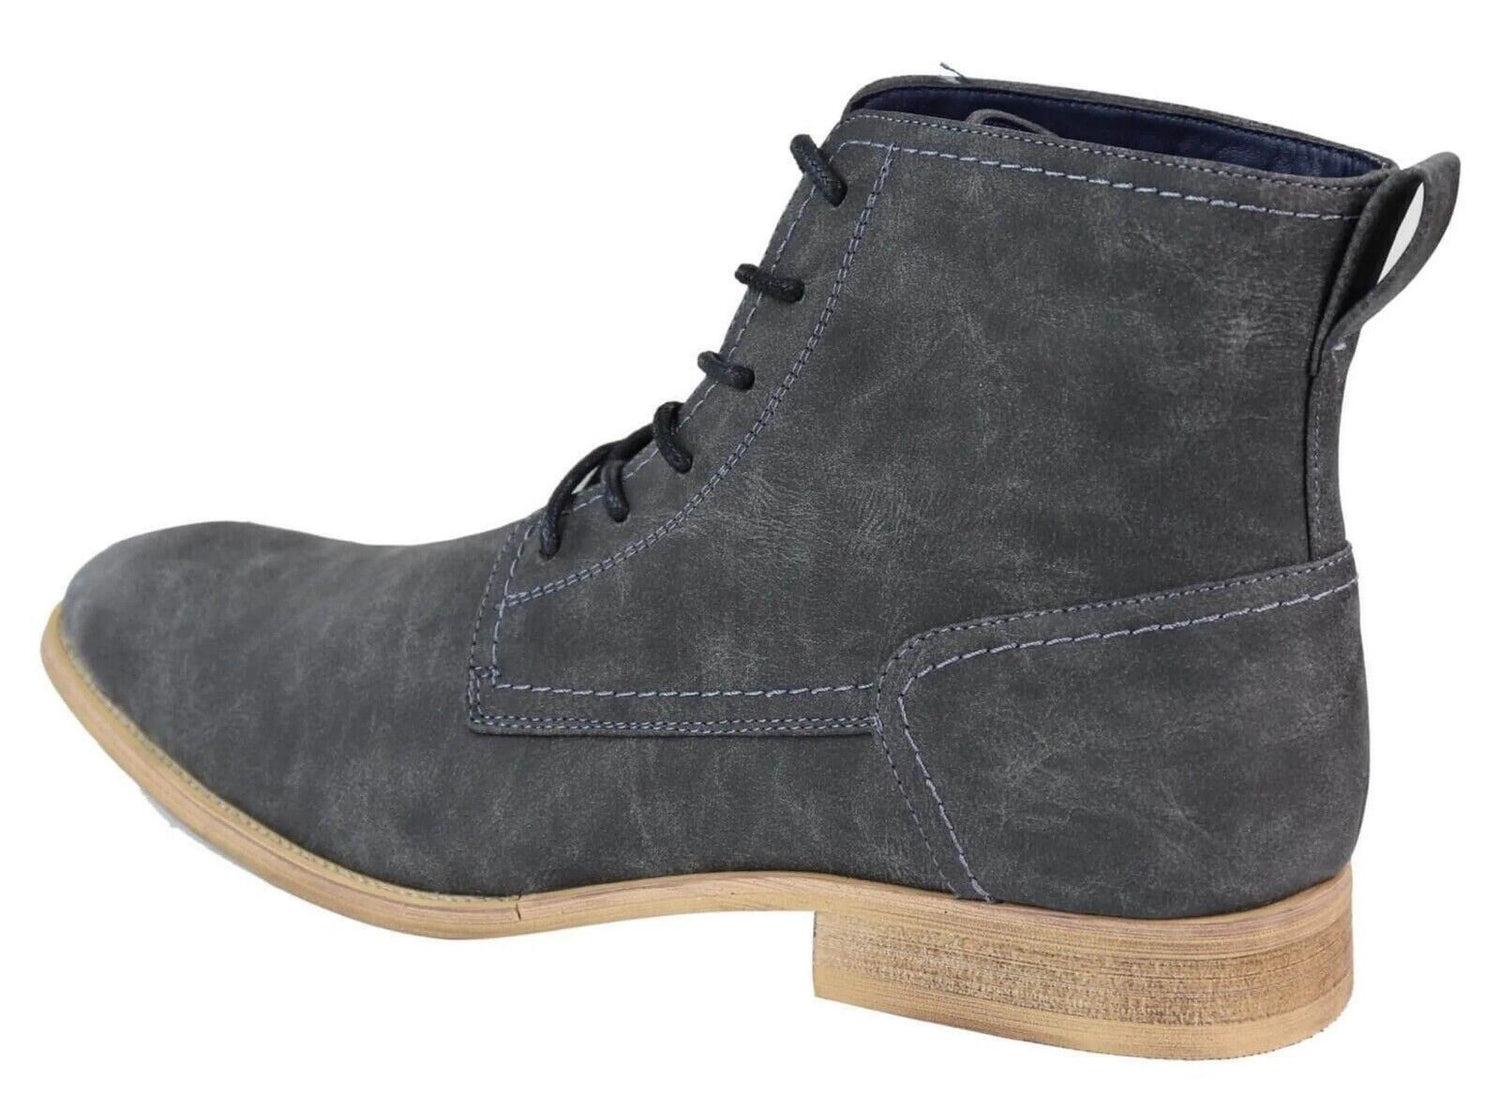 Mens Matt Grey Suede Lace Up Ankle Boots - Upperclass Fashions 